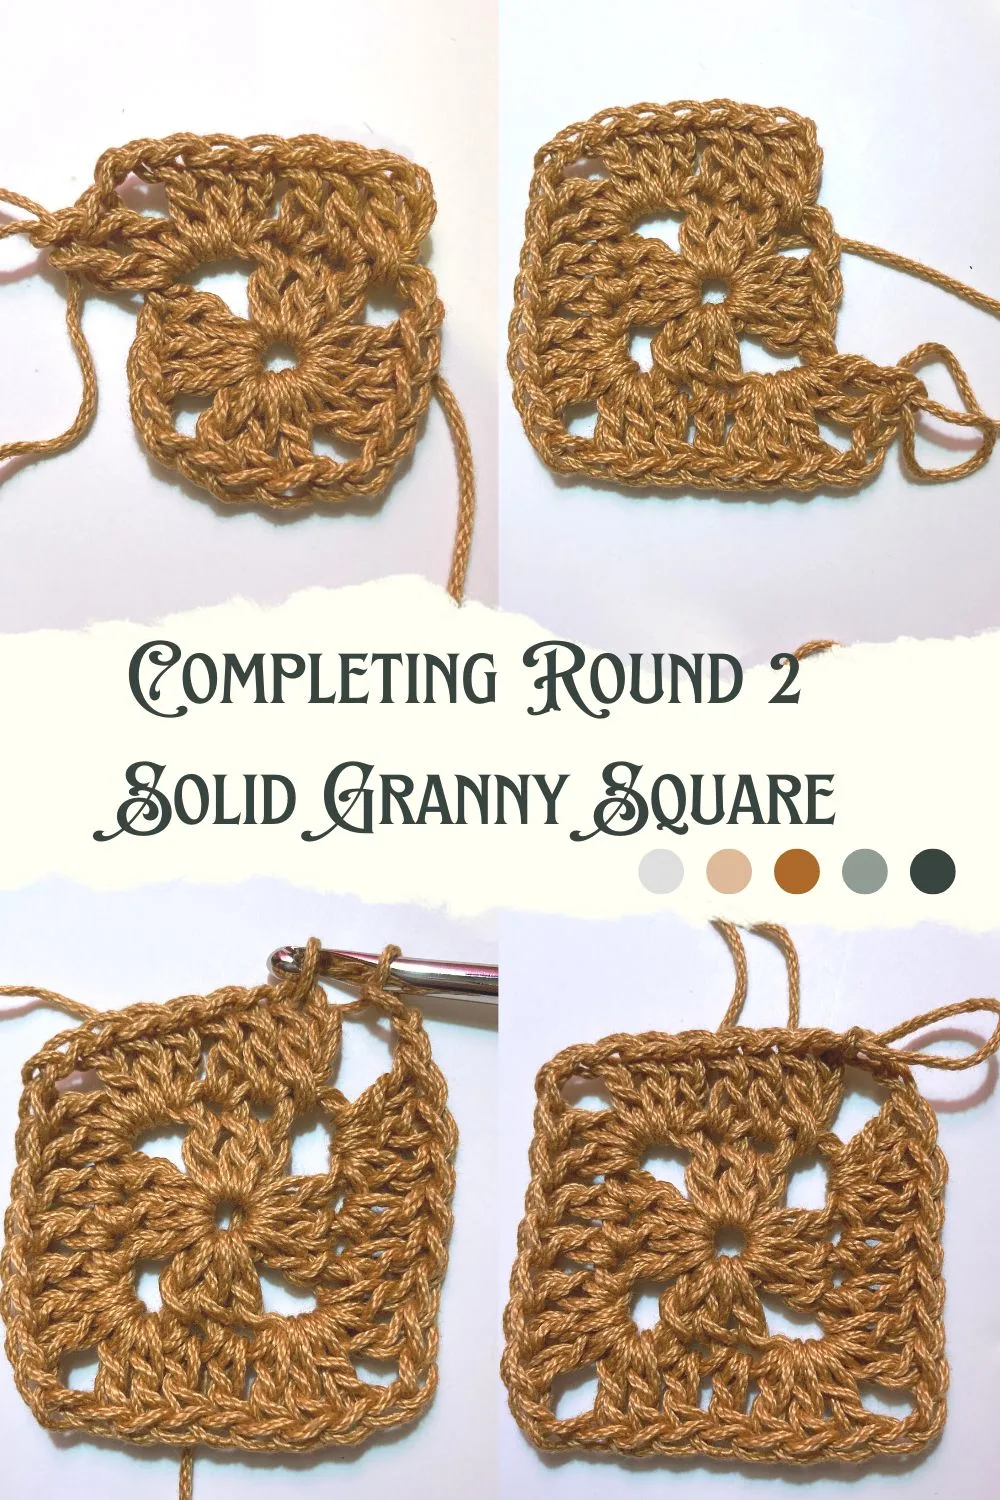 Completing Round 2 Solid Granny Square